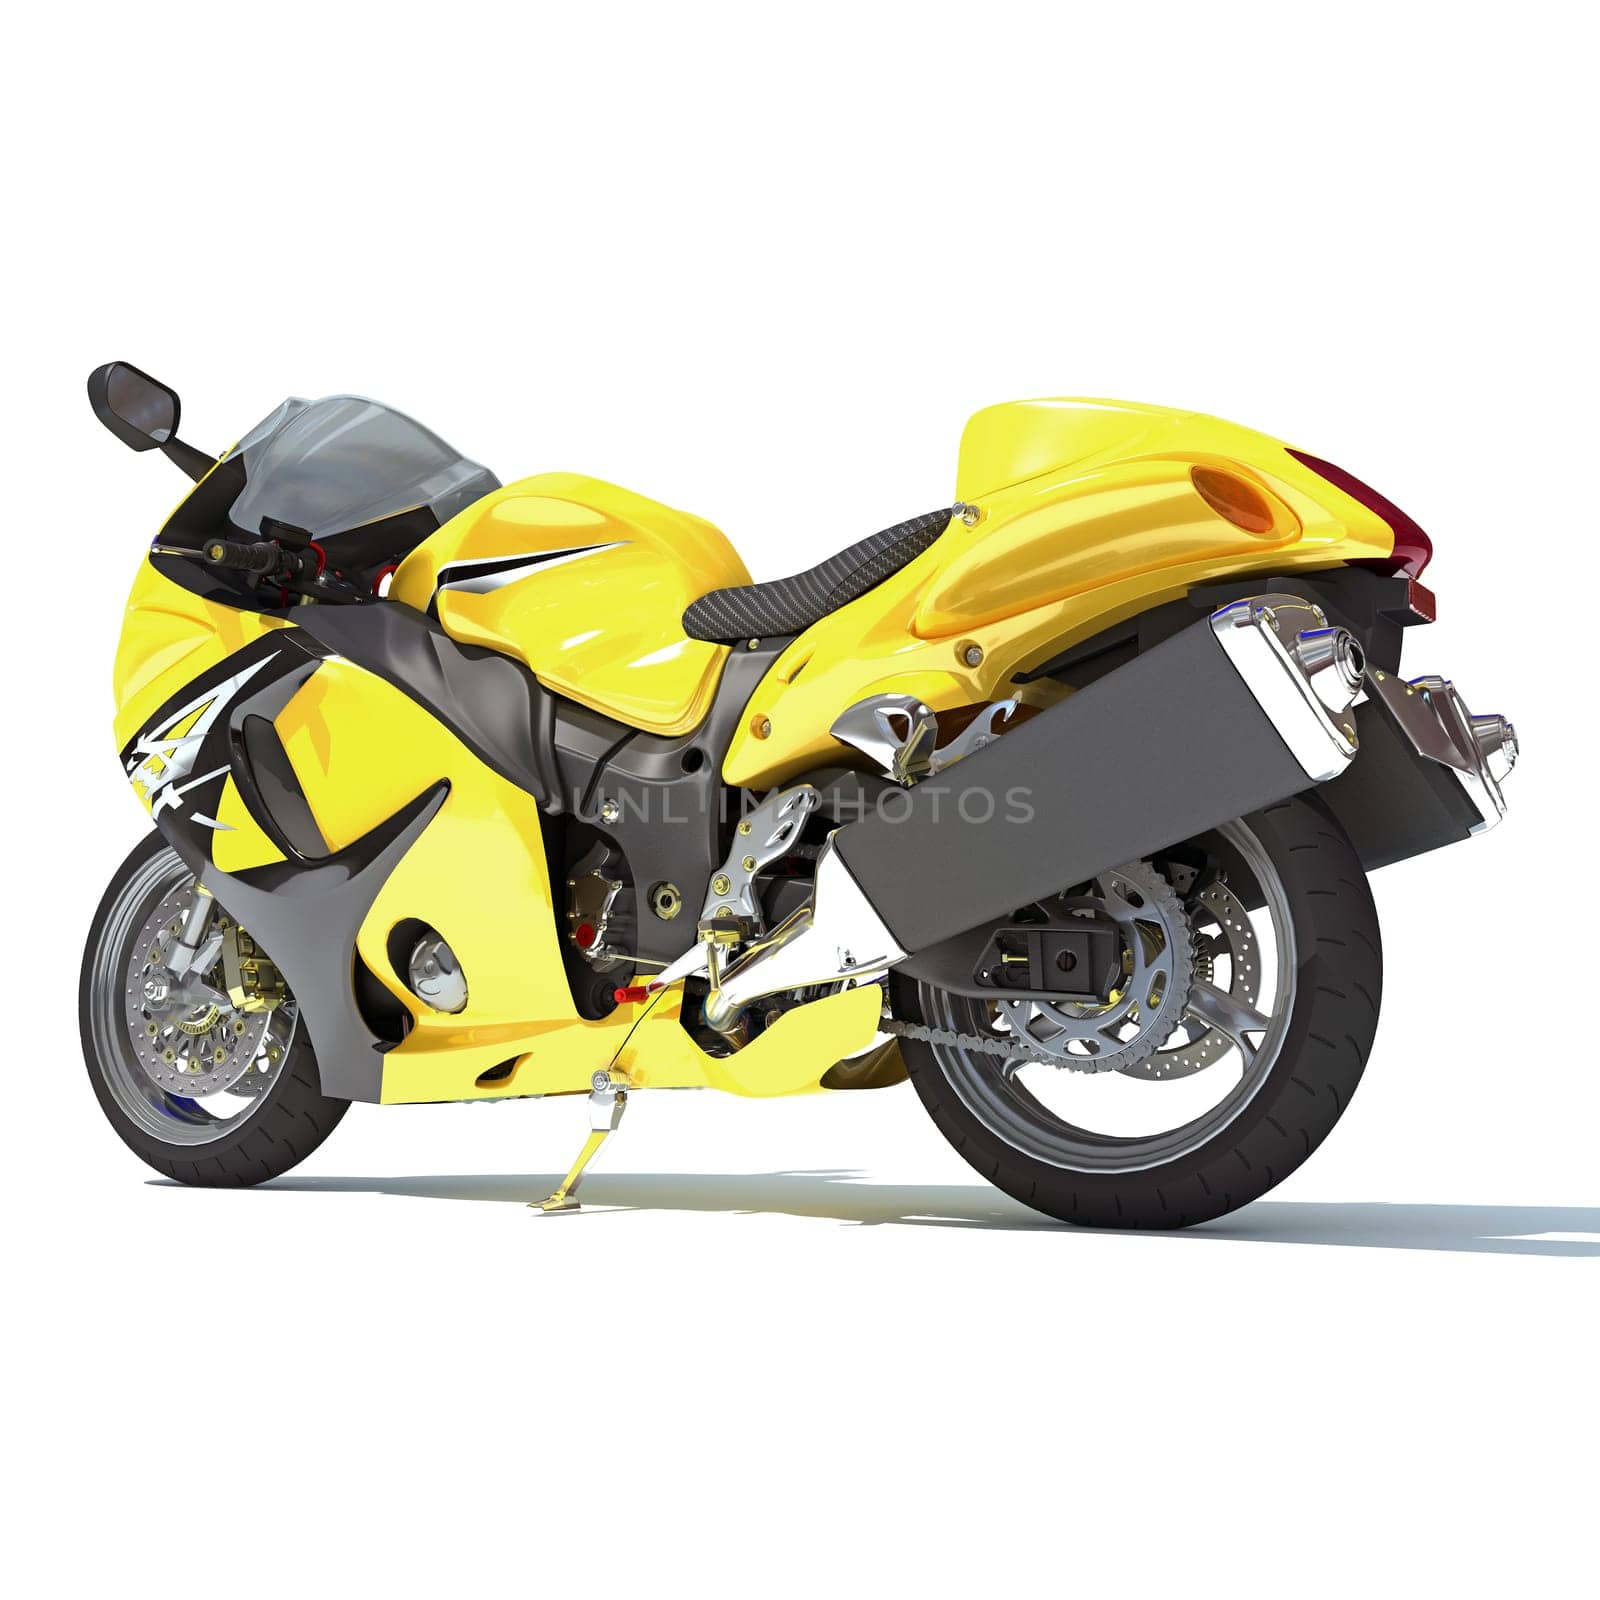 Motorcycle 3D rendering on white background by 3DHorse